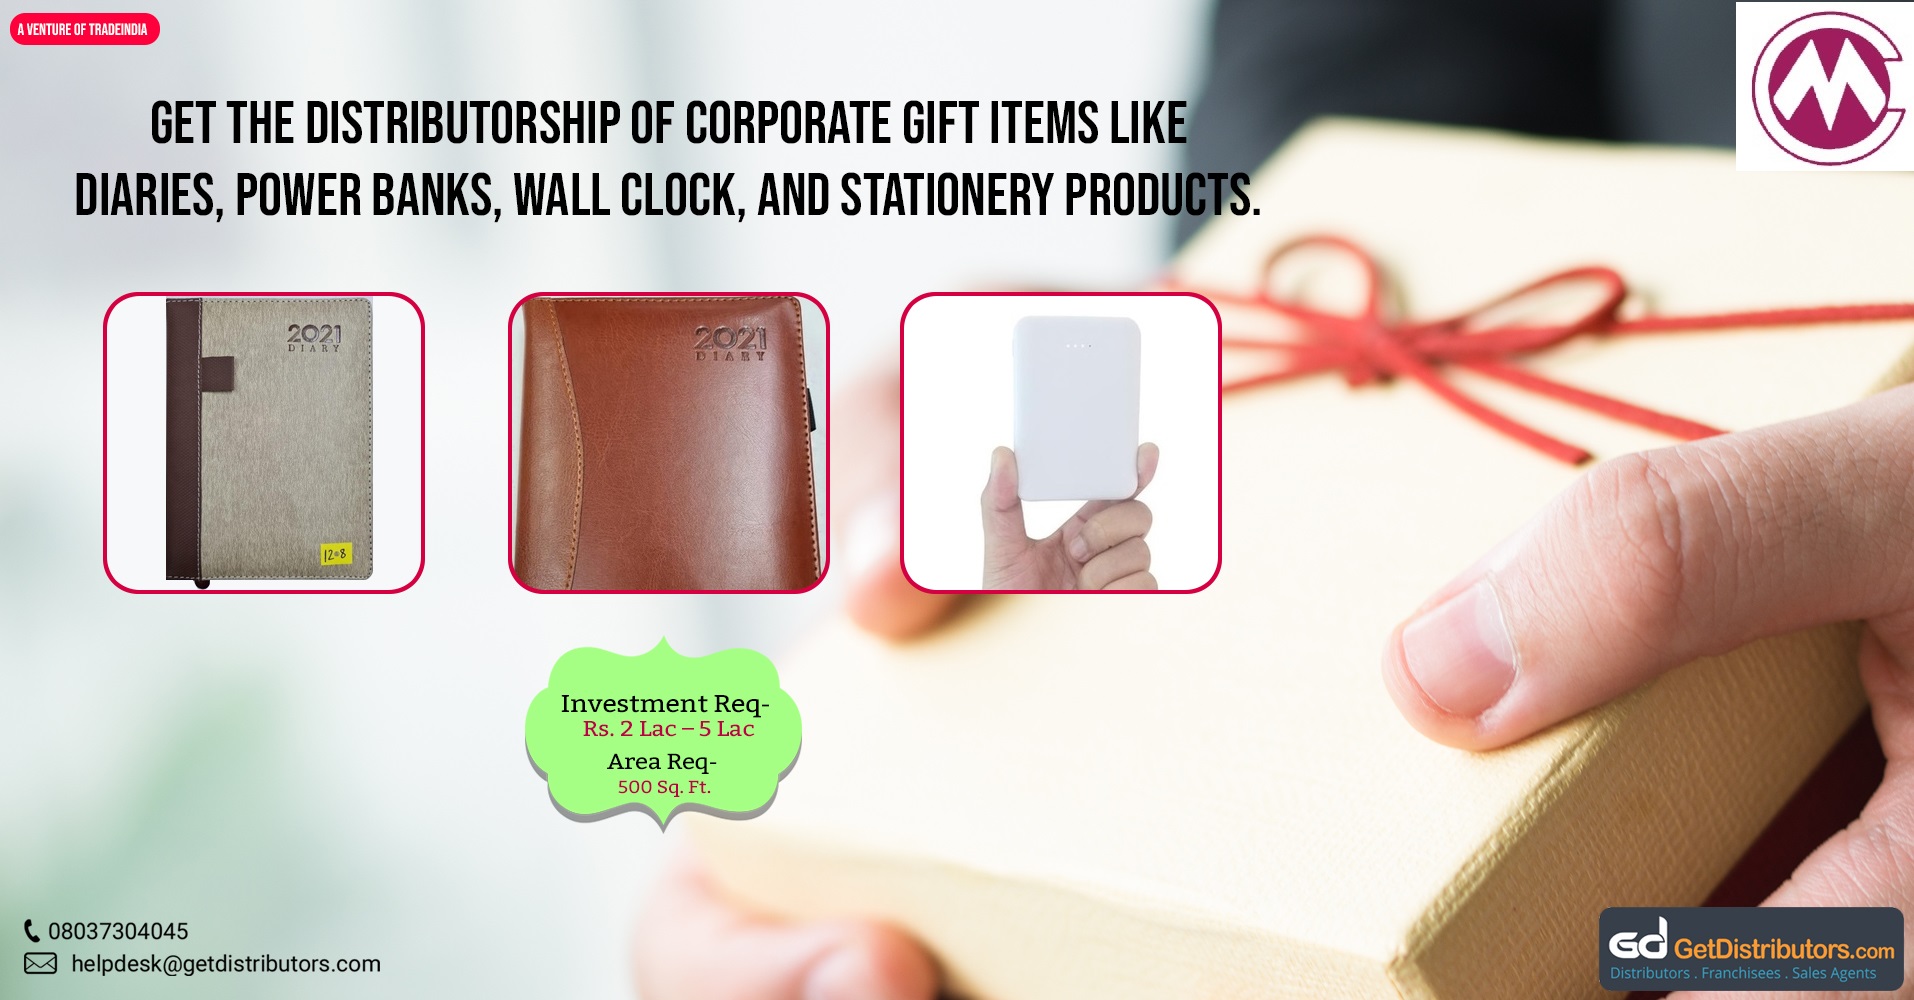 Top-class diaries, power banks, stationery, and other products for distribution